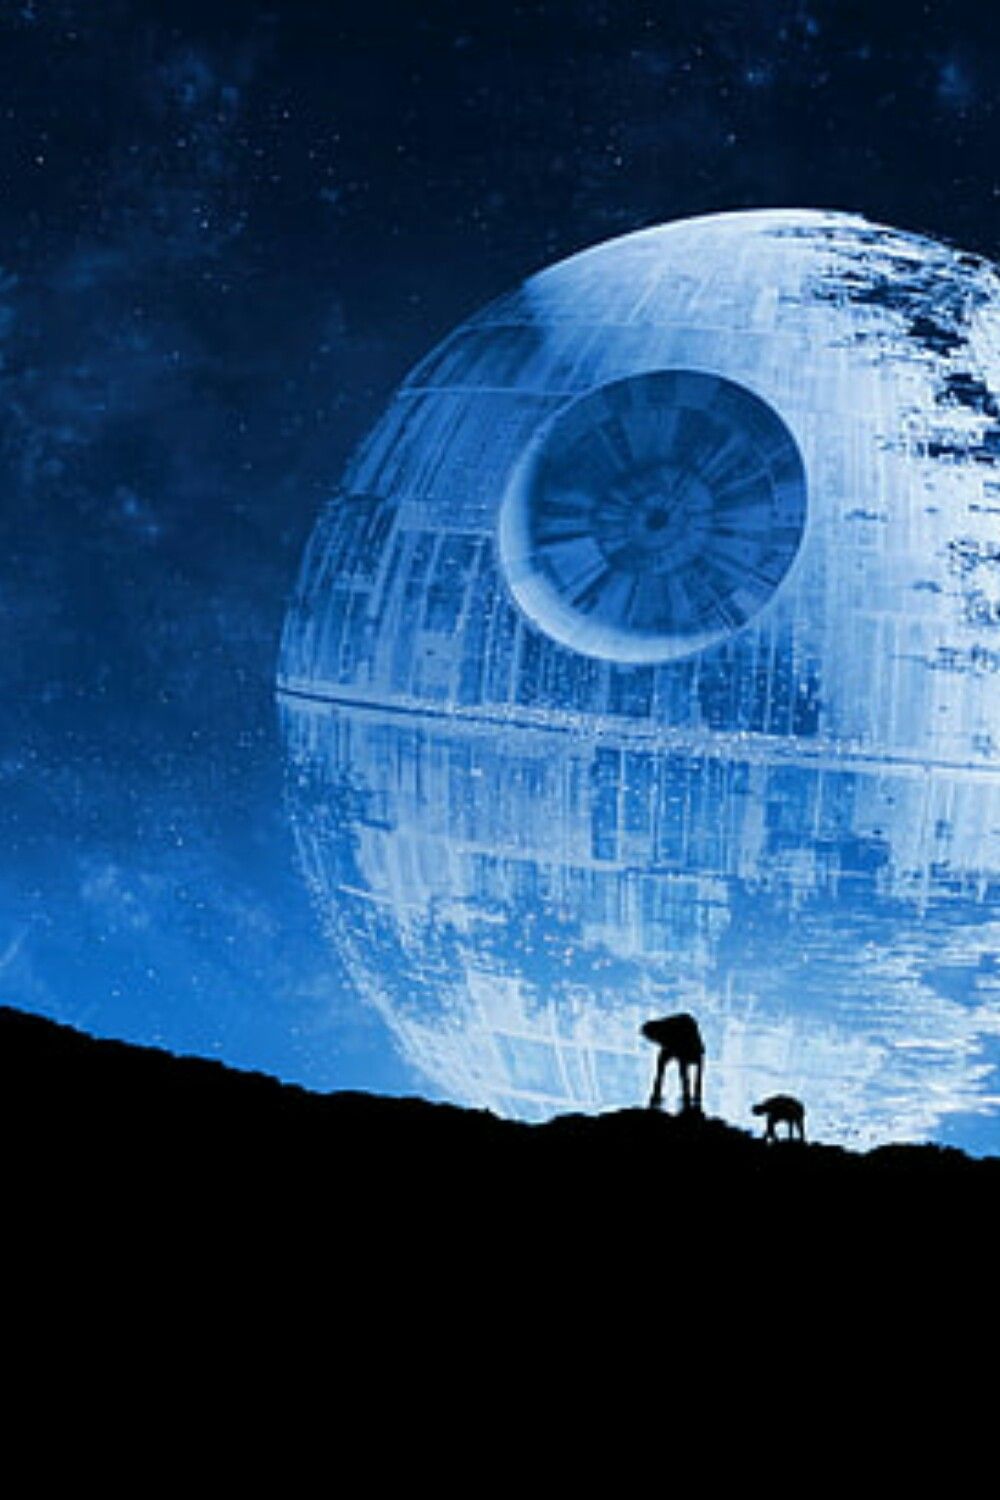 A silhouette of an AT-AT and a droid are seen in front of the Death Star in this iPhone wallpaper. - Star Wars